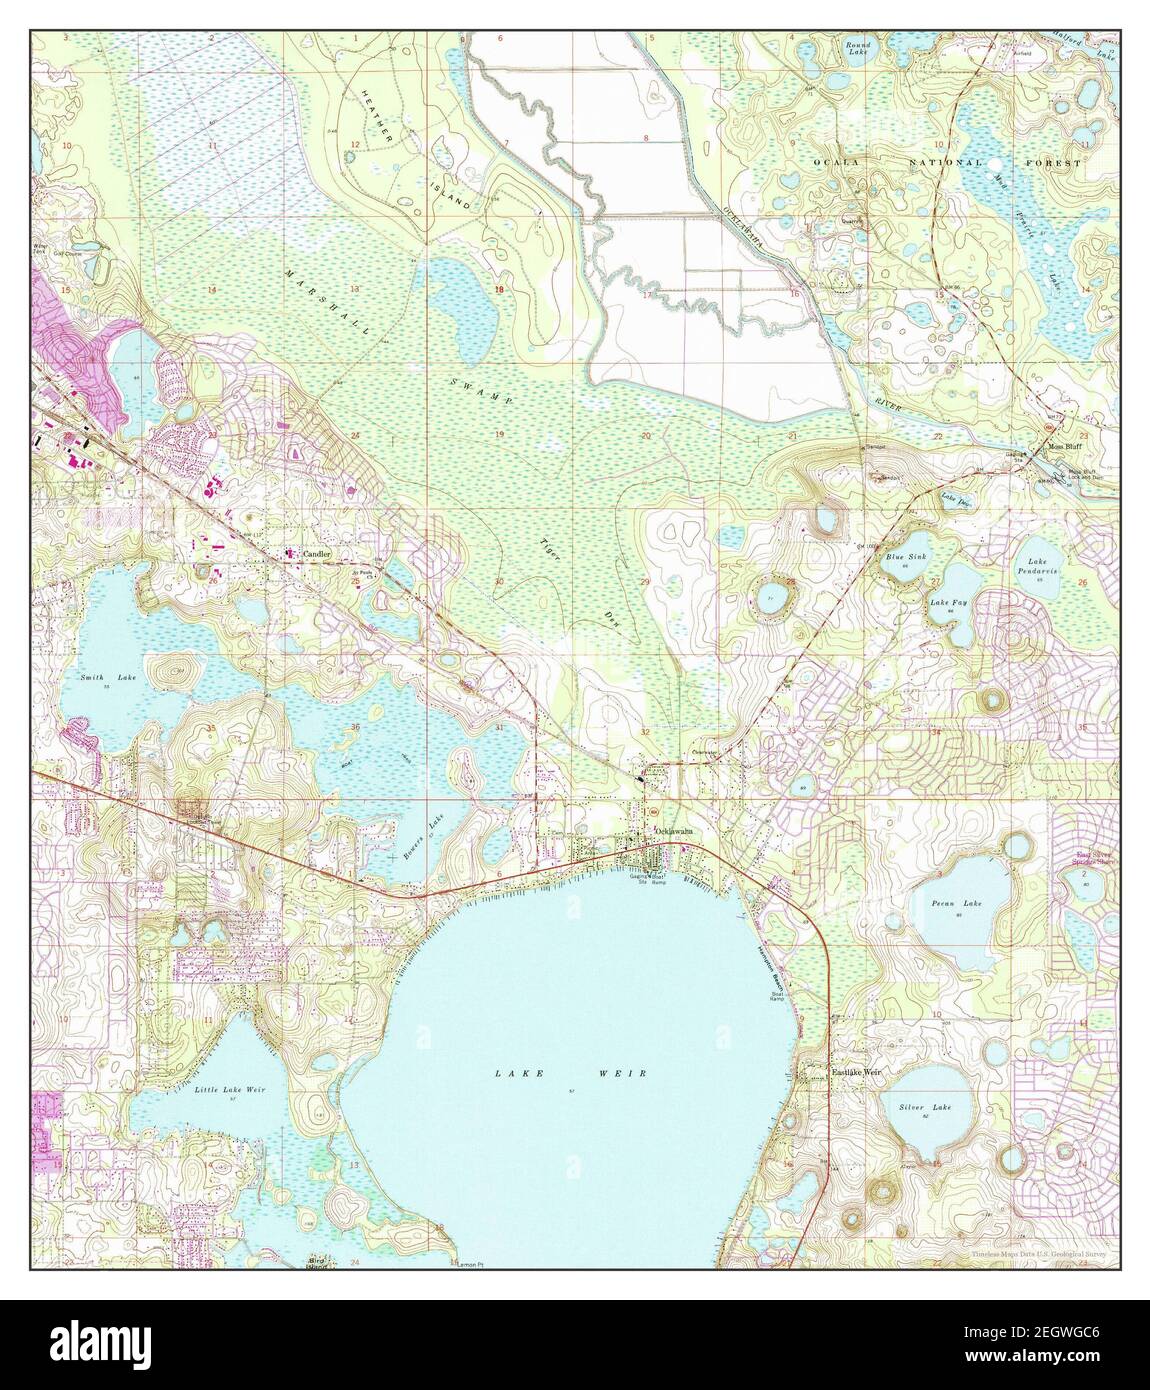 Lake Weir, Florida, map 1970, 1:24000, United States of America by Timeless Maps, data U.S. Geological Survey Stock Photo